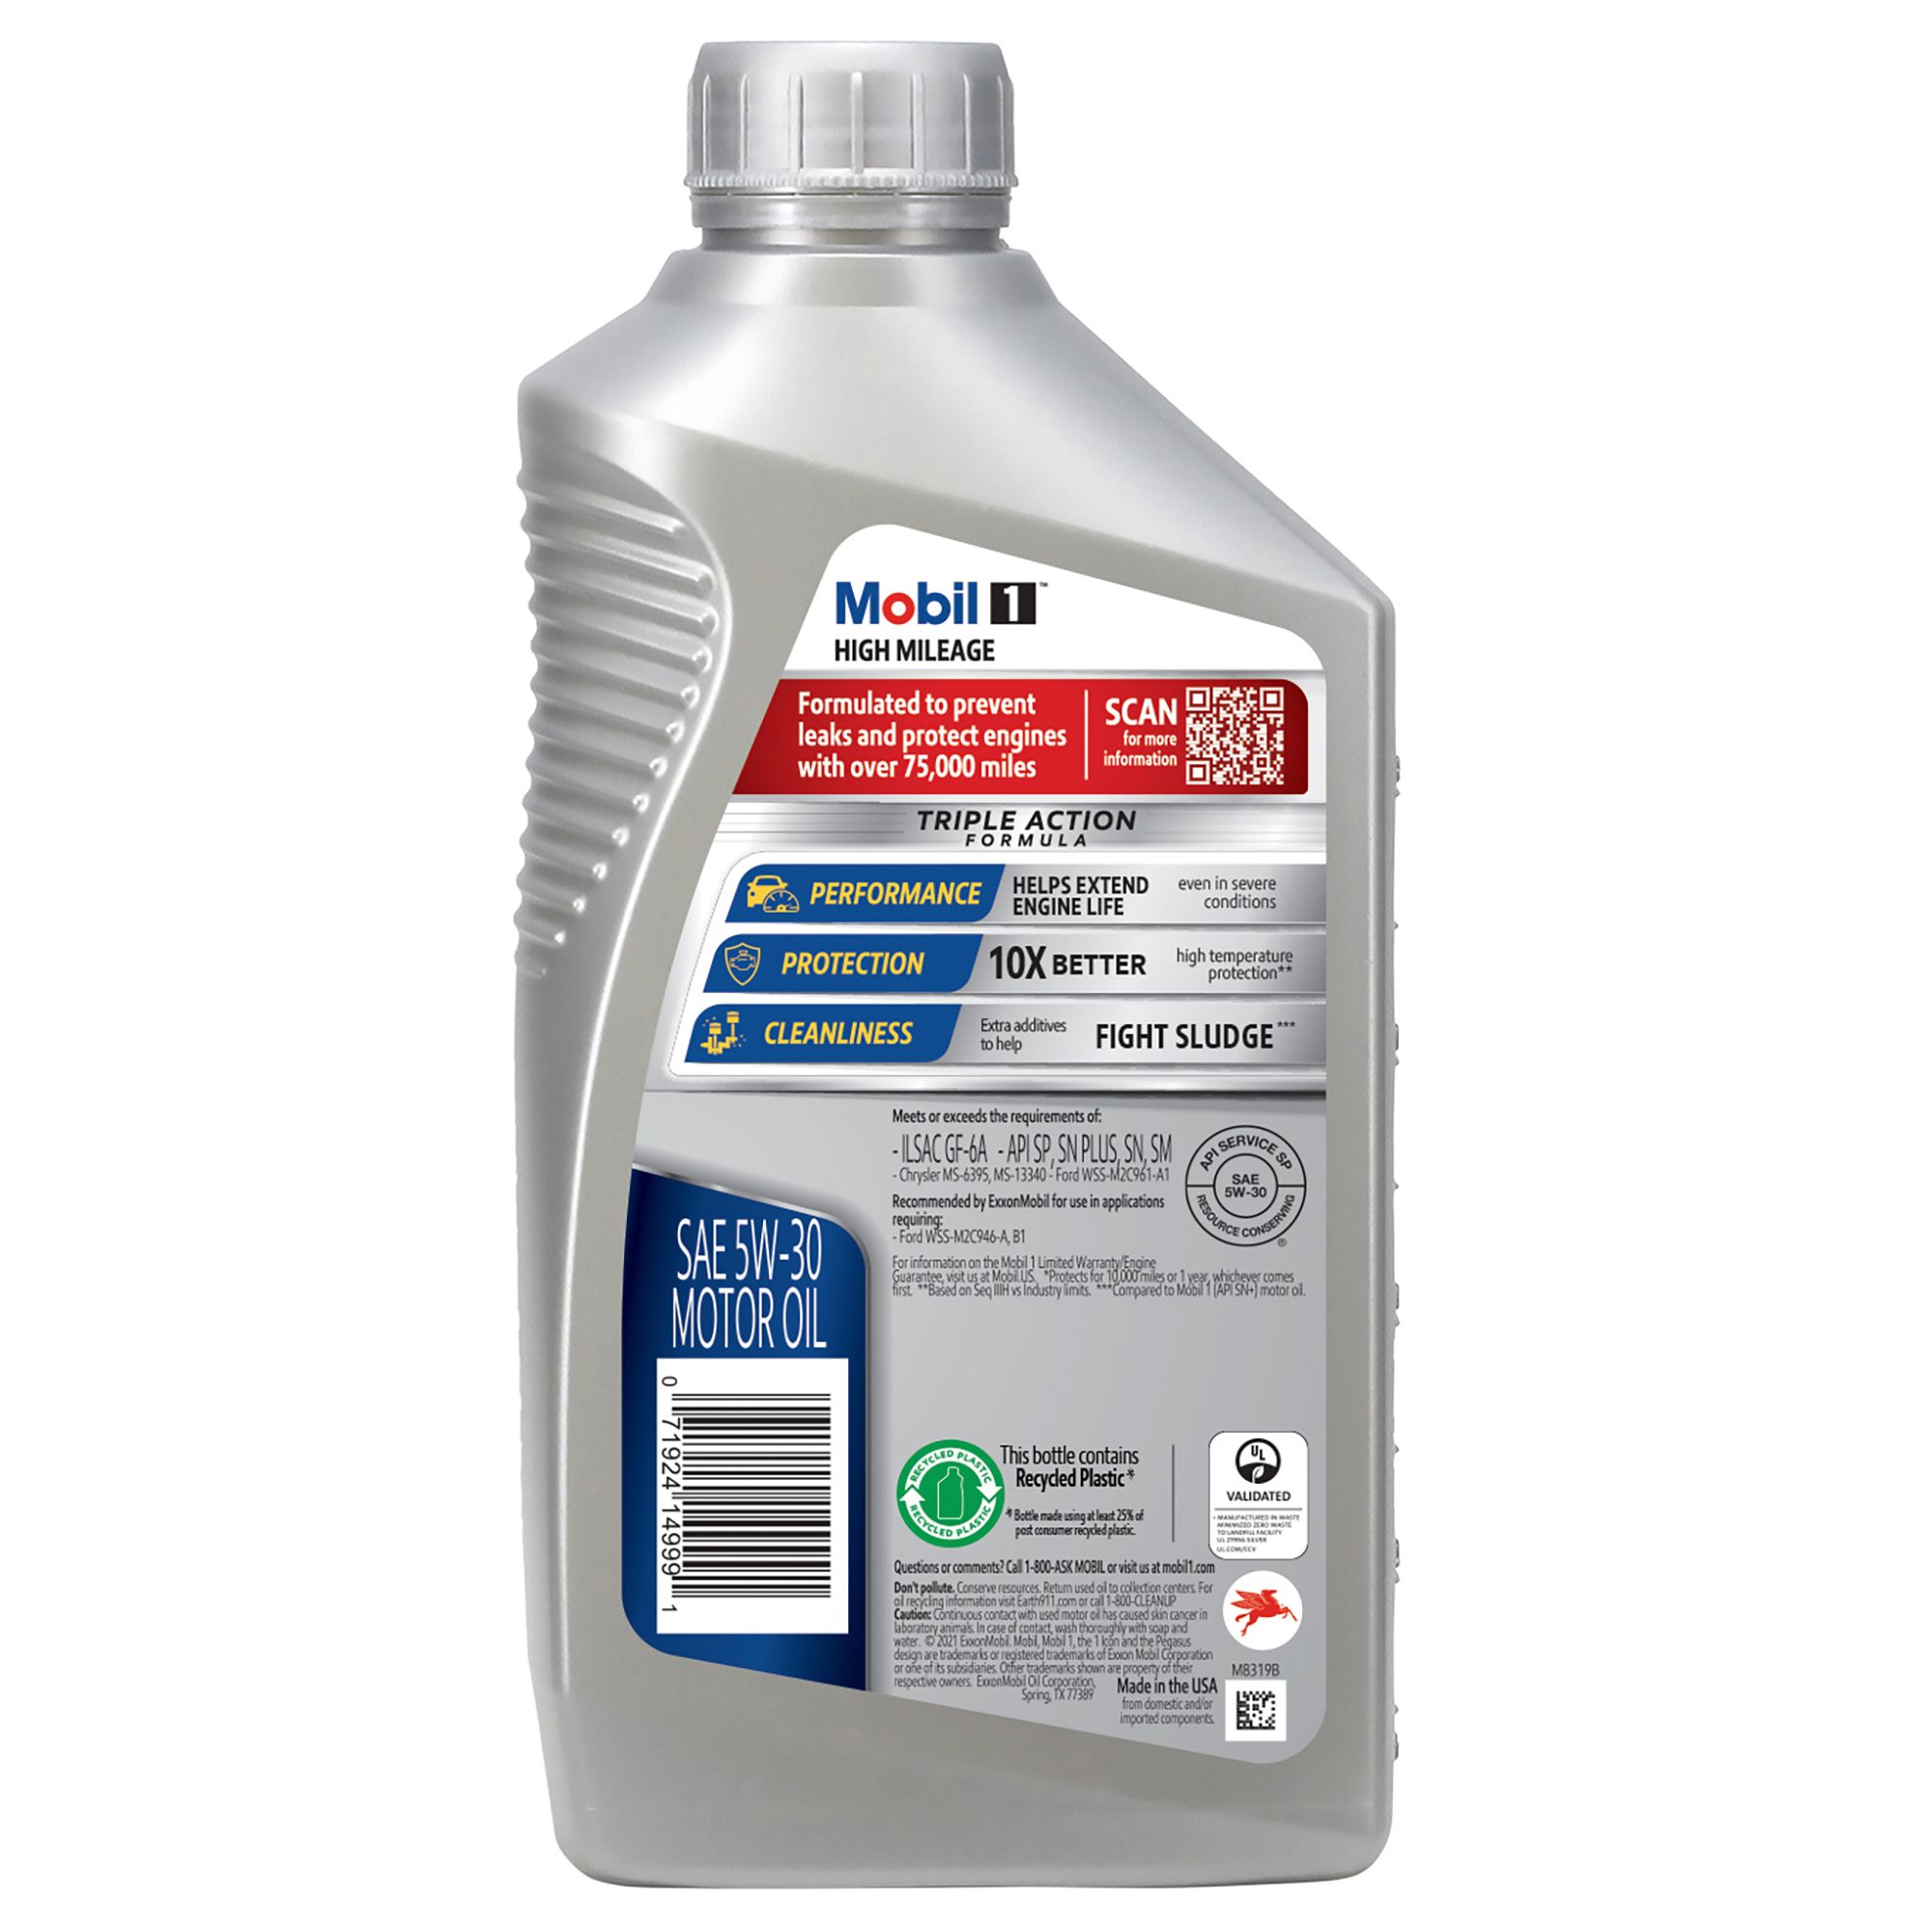 Mobil 5W-30 High Mileage Synthetic Oil, 6 pk./1 qt.